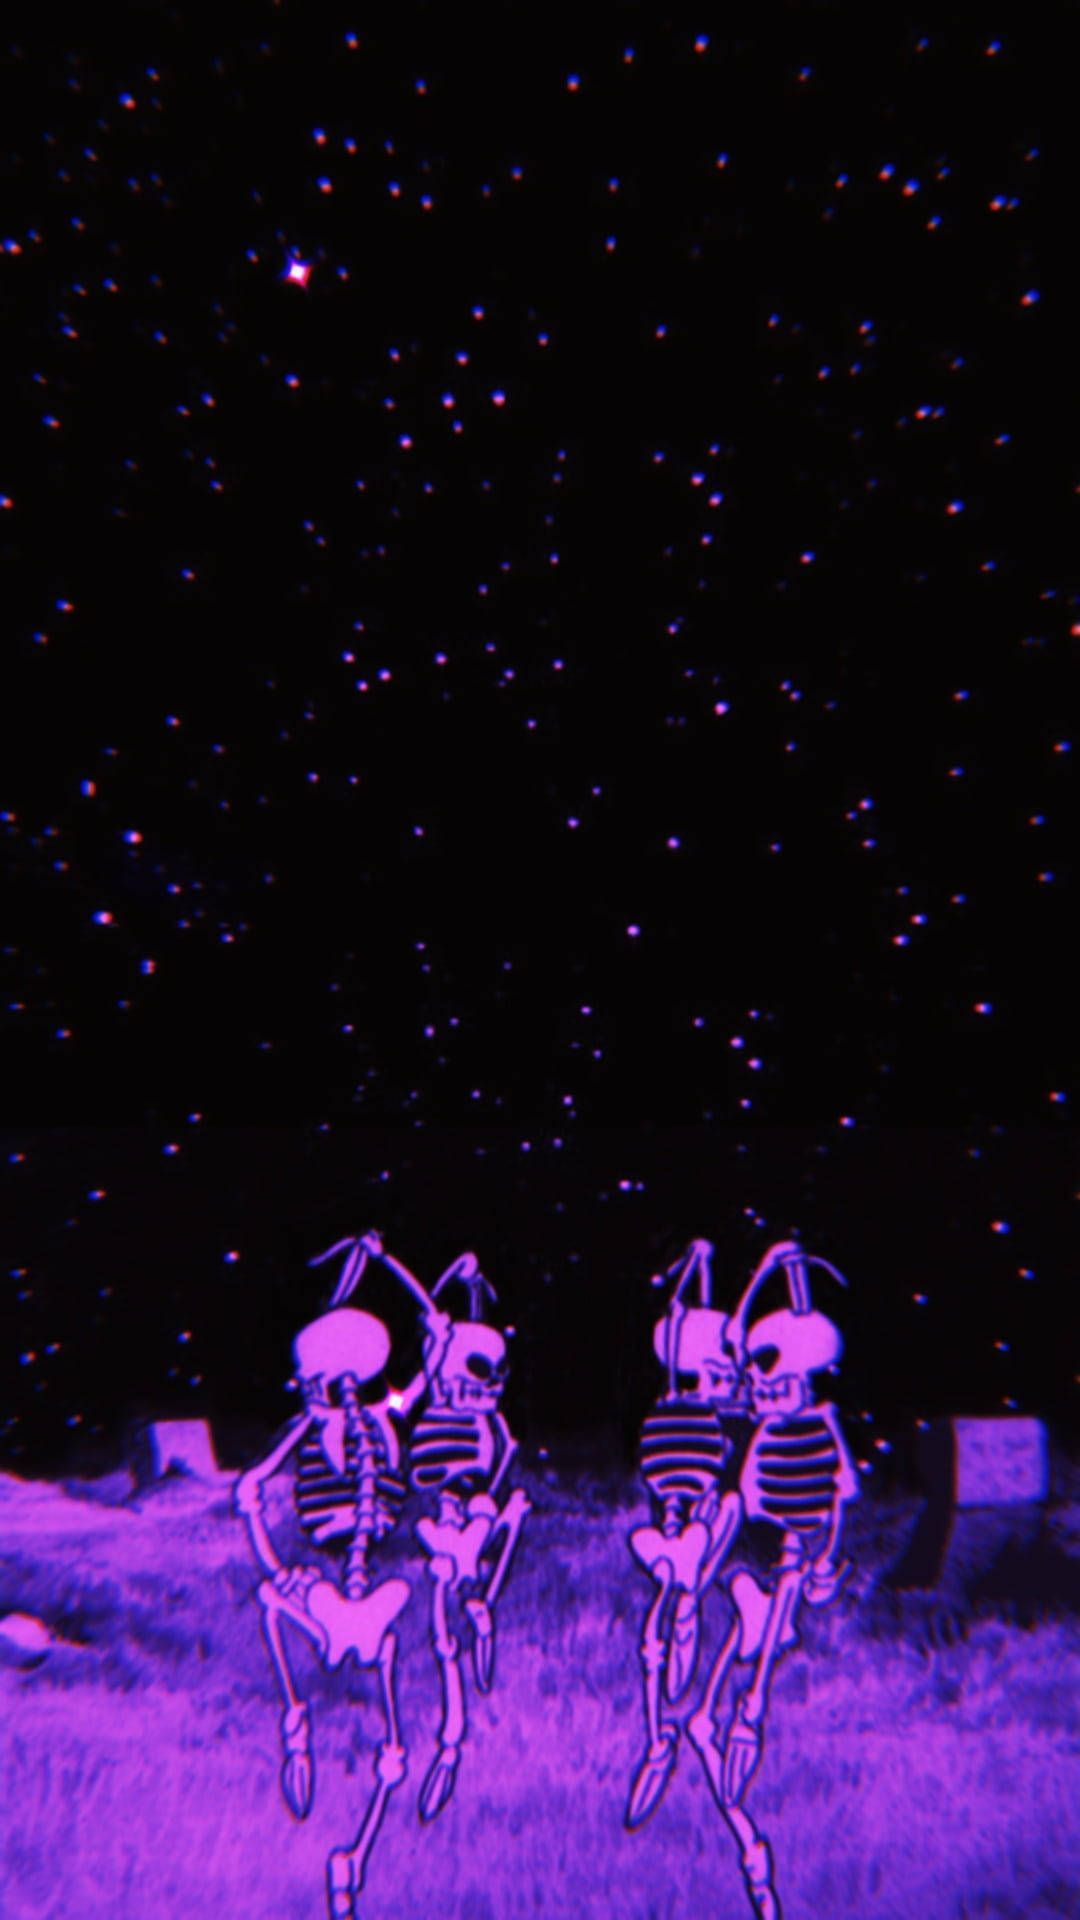 Purple Aesthetic Wallpaper iPhone with high-resolution 1080x1920 pixel. You can use this wallpaper for your iPhone 5, 6, 7, 8, X, XS, XR backgrounds, Mobile Screensaver, or iPad Lock Screen - Dance, skeleton, dab dance